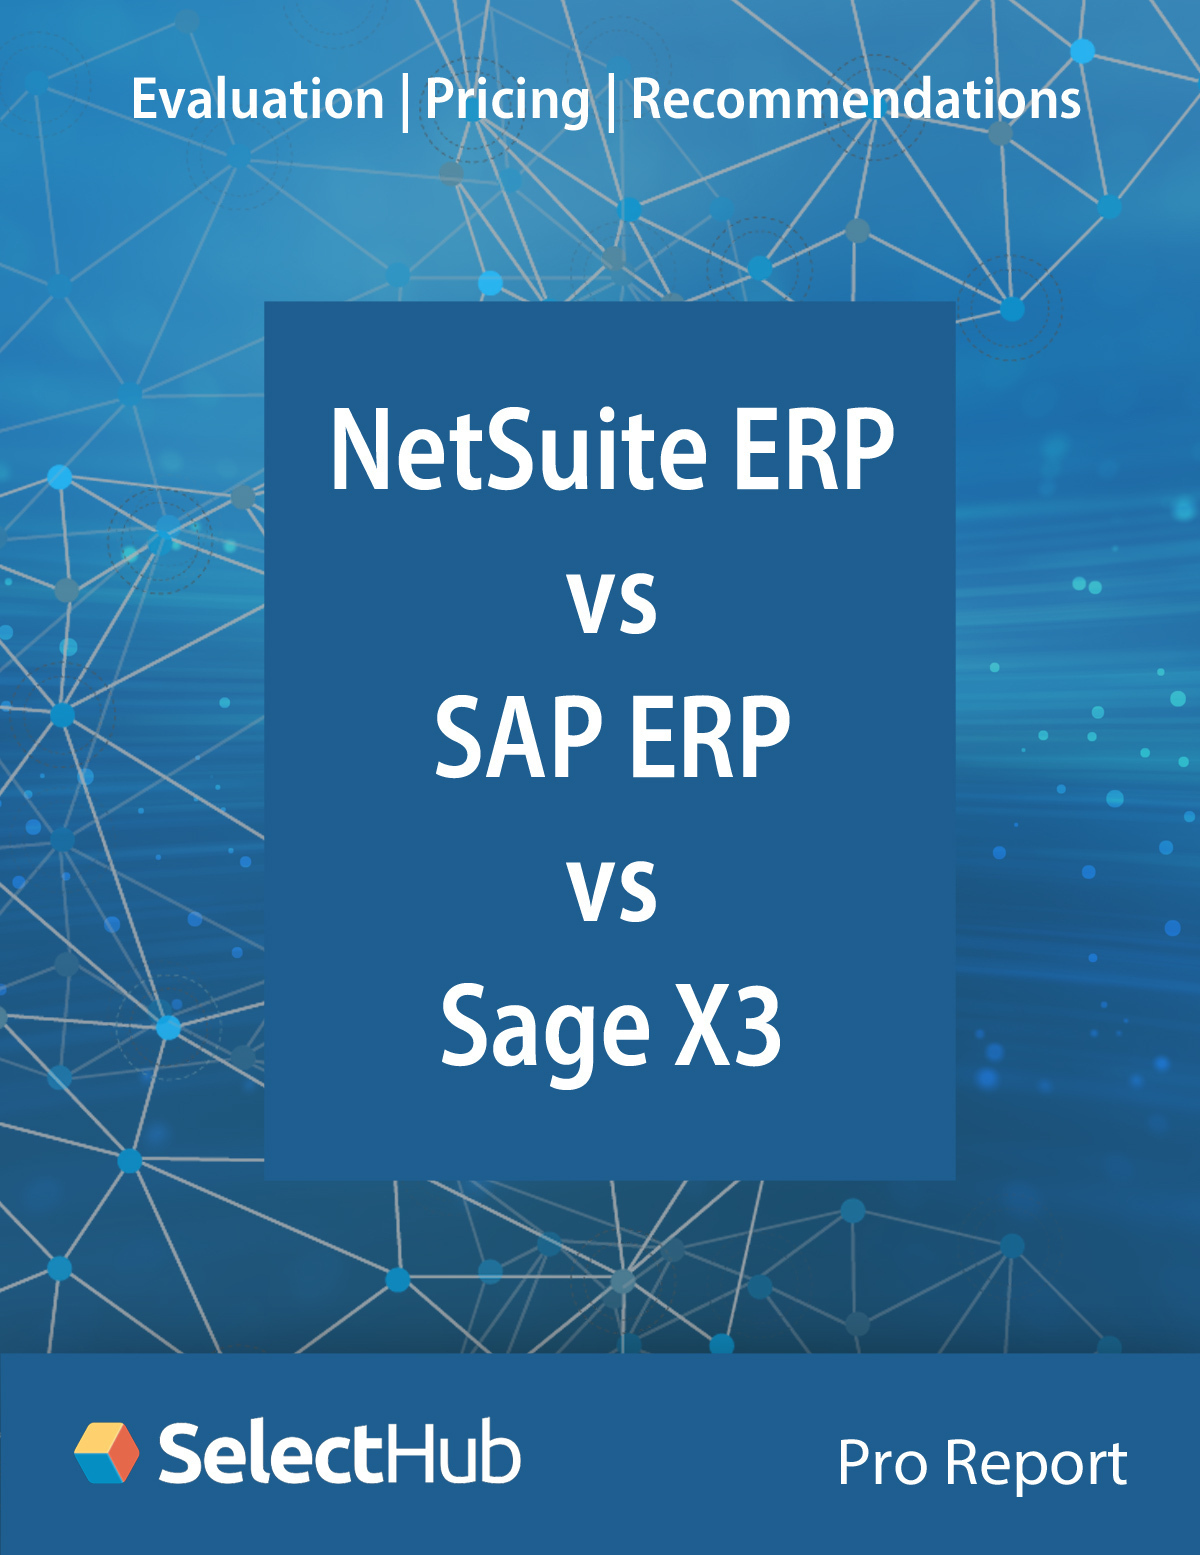 Image: NetSuite ERP vs. SAP ERP vs. Sage X3― Expert Evaluations, Pricing & Recommendations